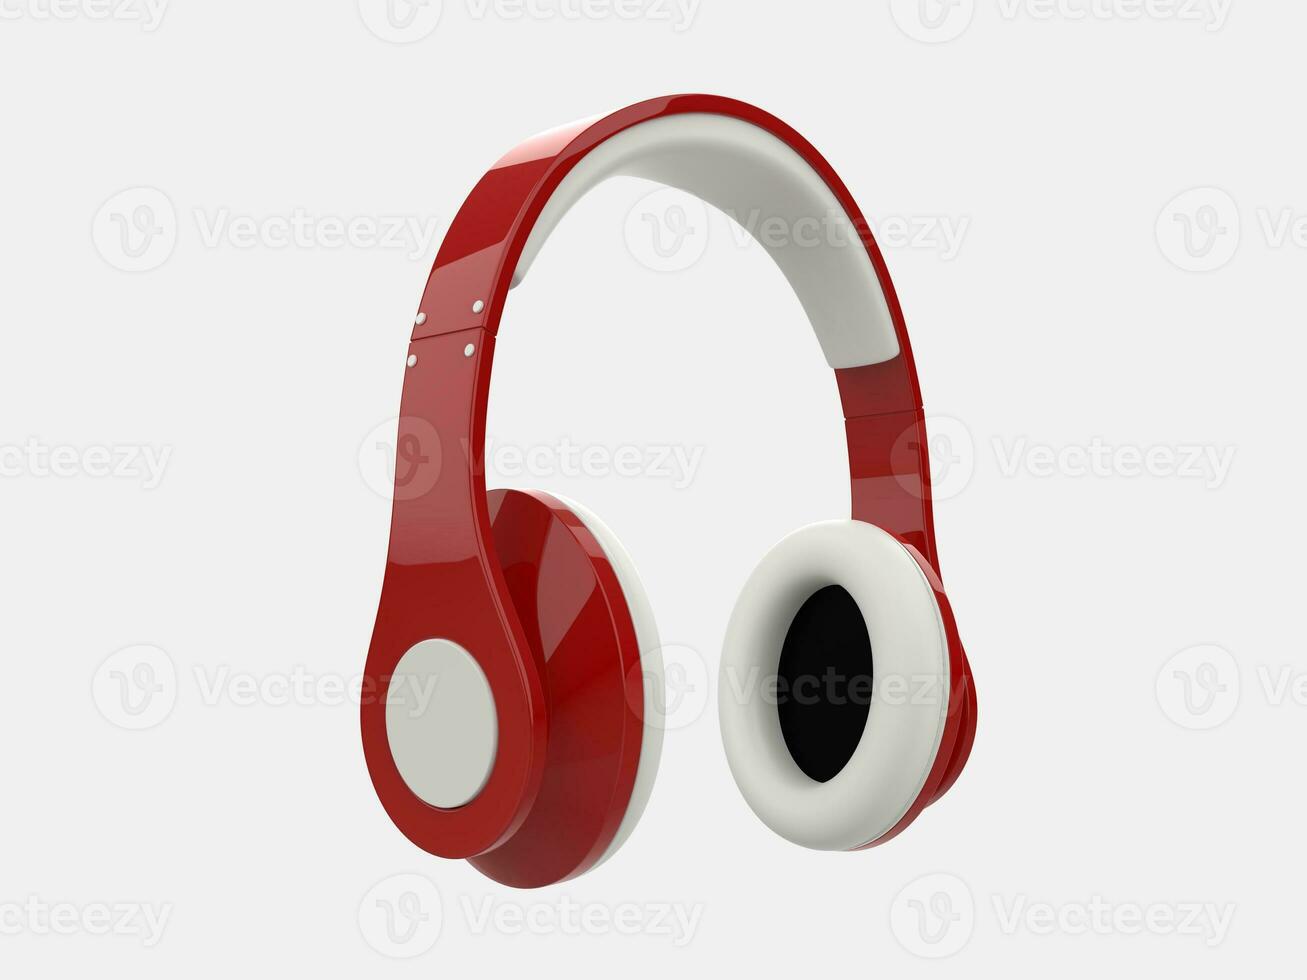 Modern shiny red headphones with white detailing photo